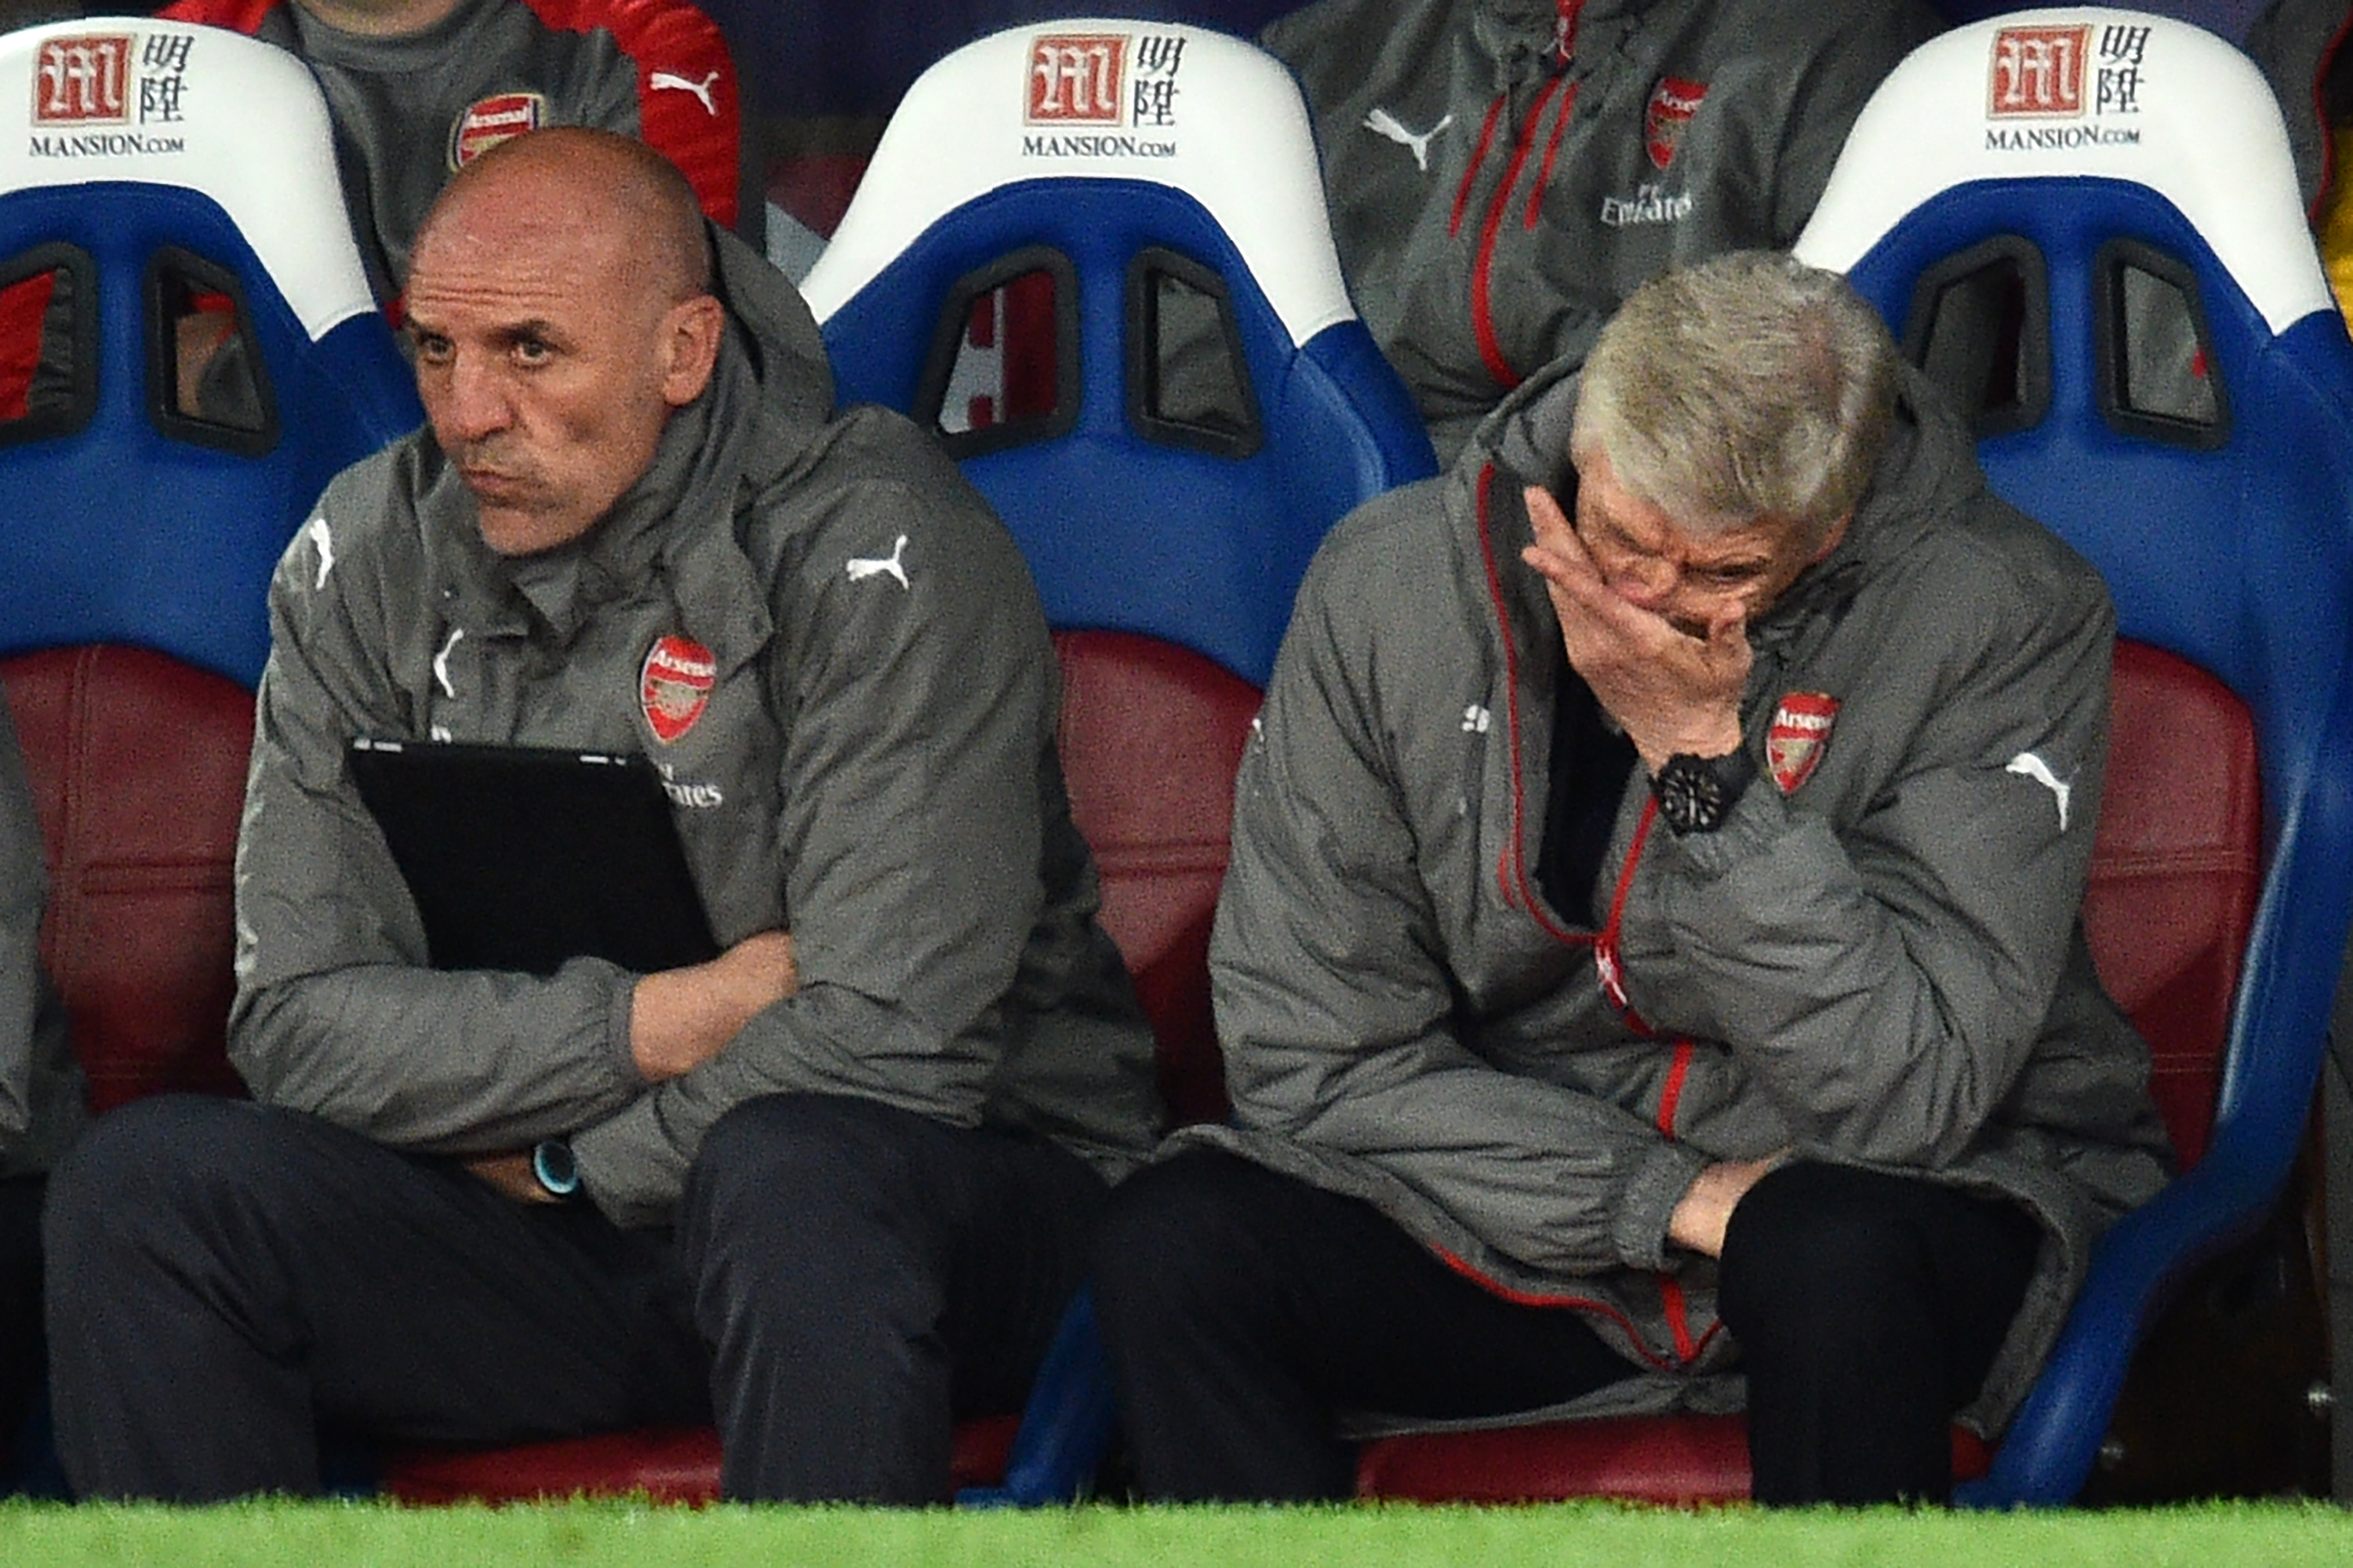 Arsenal's French manager Arsene Wenger (R) and assistant Steve Bould gesture in their seats during the English Premier League football match between Crystal Palace and Arsenal at Selhurst Park in south London on April 10, 2017.
Crystal Palace won the game 3-0. / AFP PHOTO / Glyn KIRK / RESTRICTED TO EDITORIAL USE. No use with unauthorized audio, video, data, fixture lists, club/league logos or 'live' services. Online in-match use limited to 75 images, no video emulation. No use in betting, games or single club/league/player publications.  /         (Photo credit should read GLYN KIRK/AFP/Getty Images)